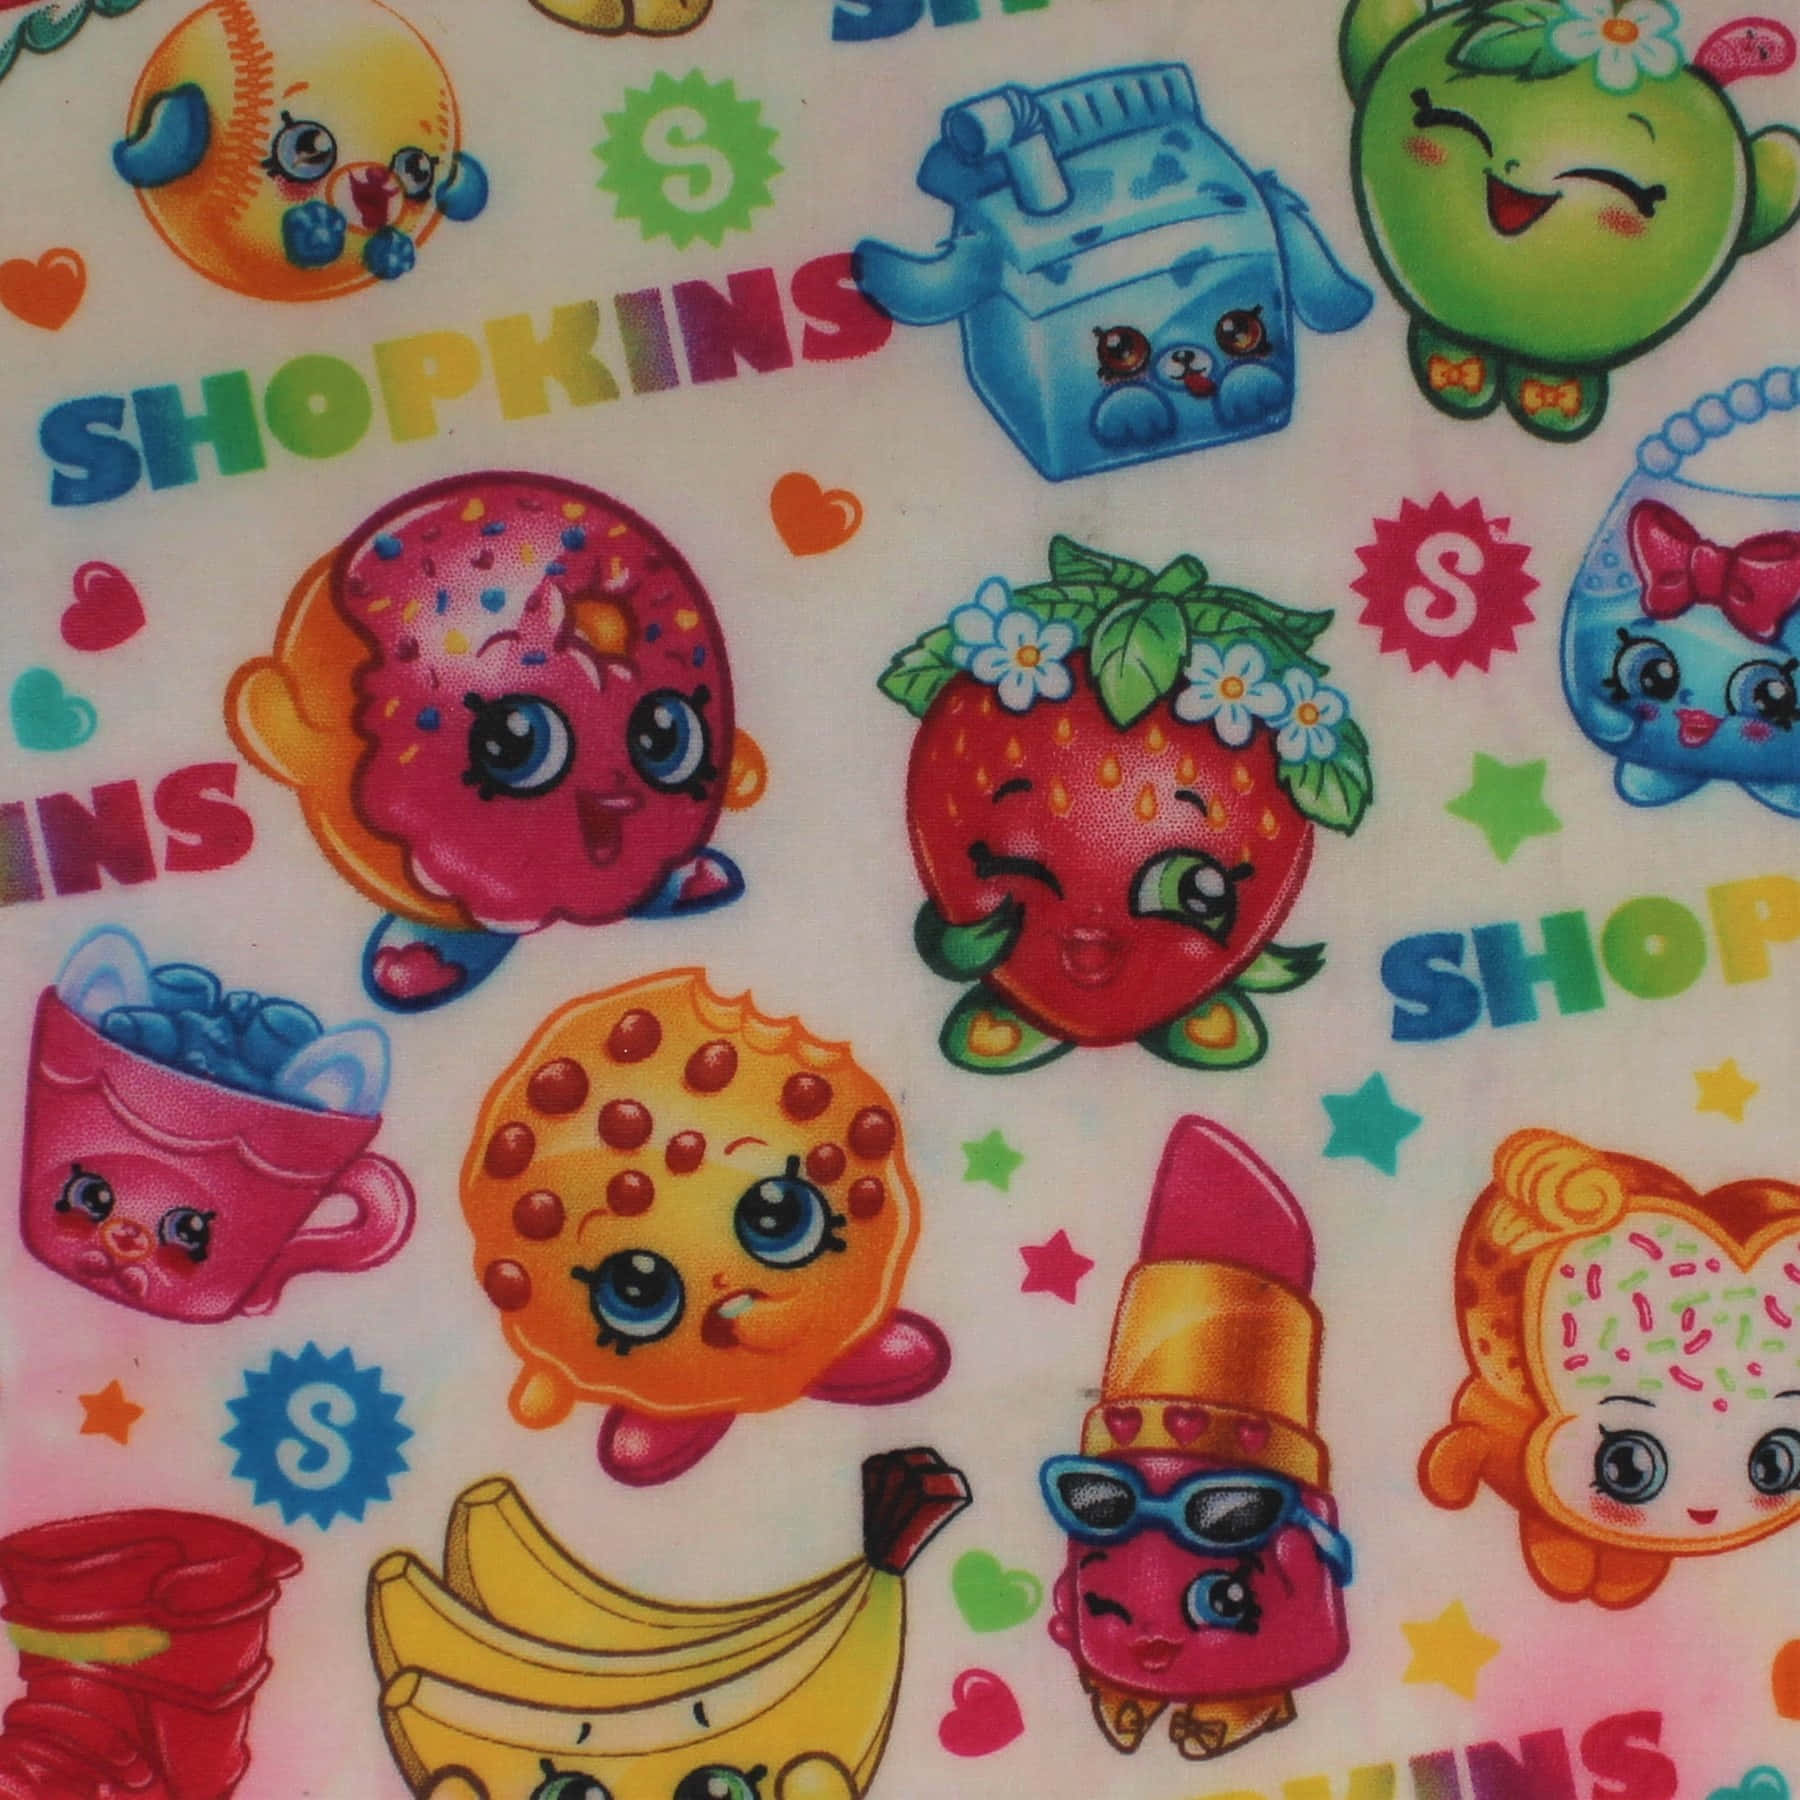 A Colorful Collection of Cheerful Shopkins Characters